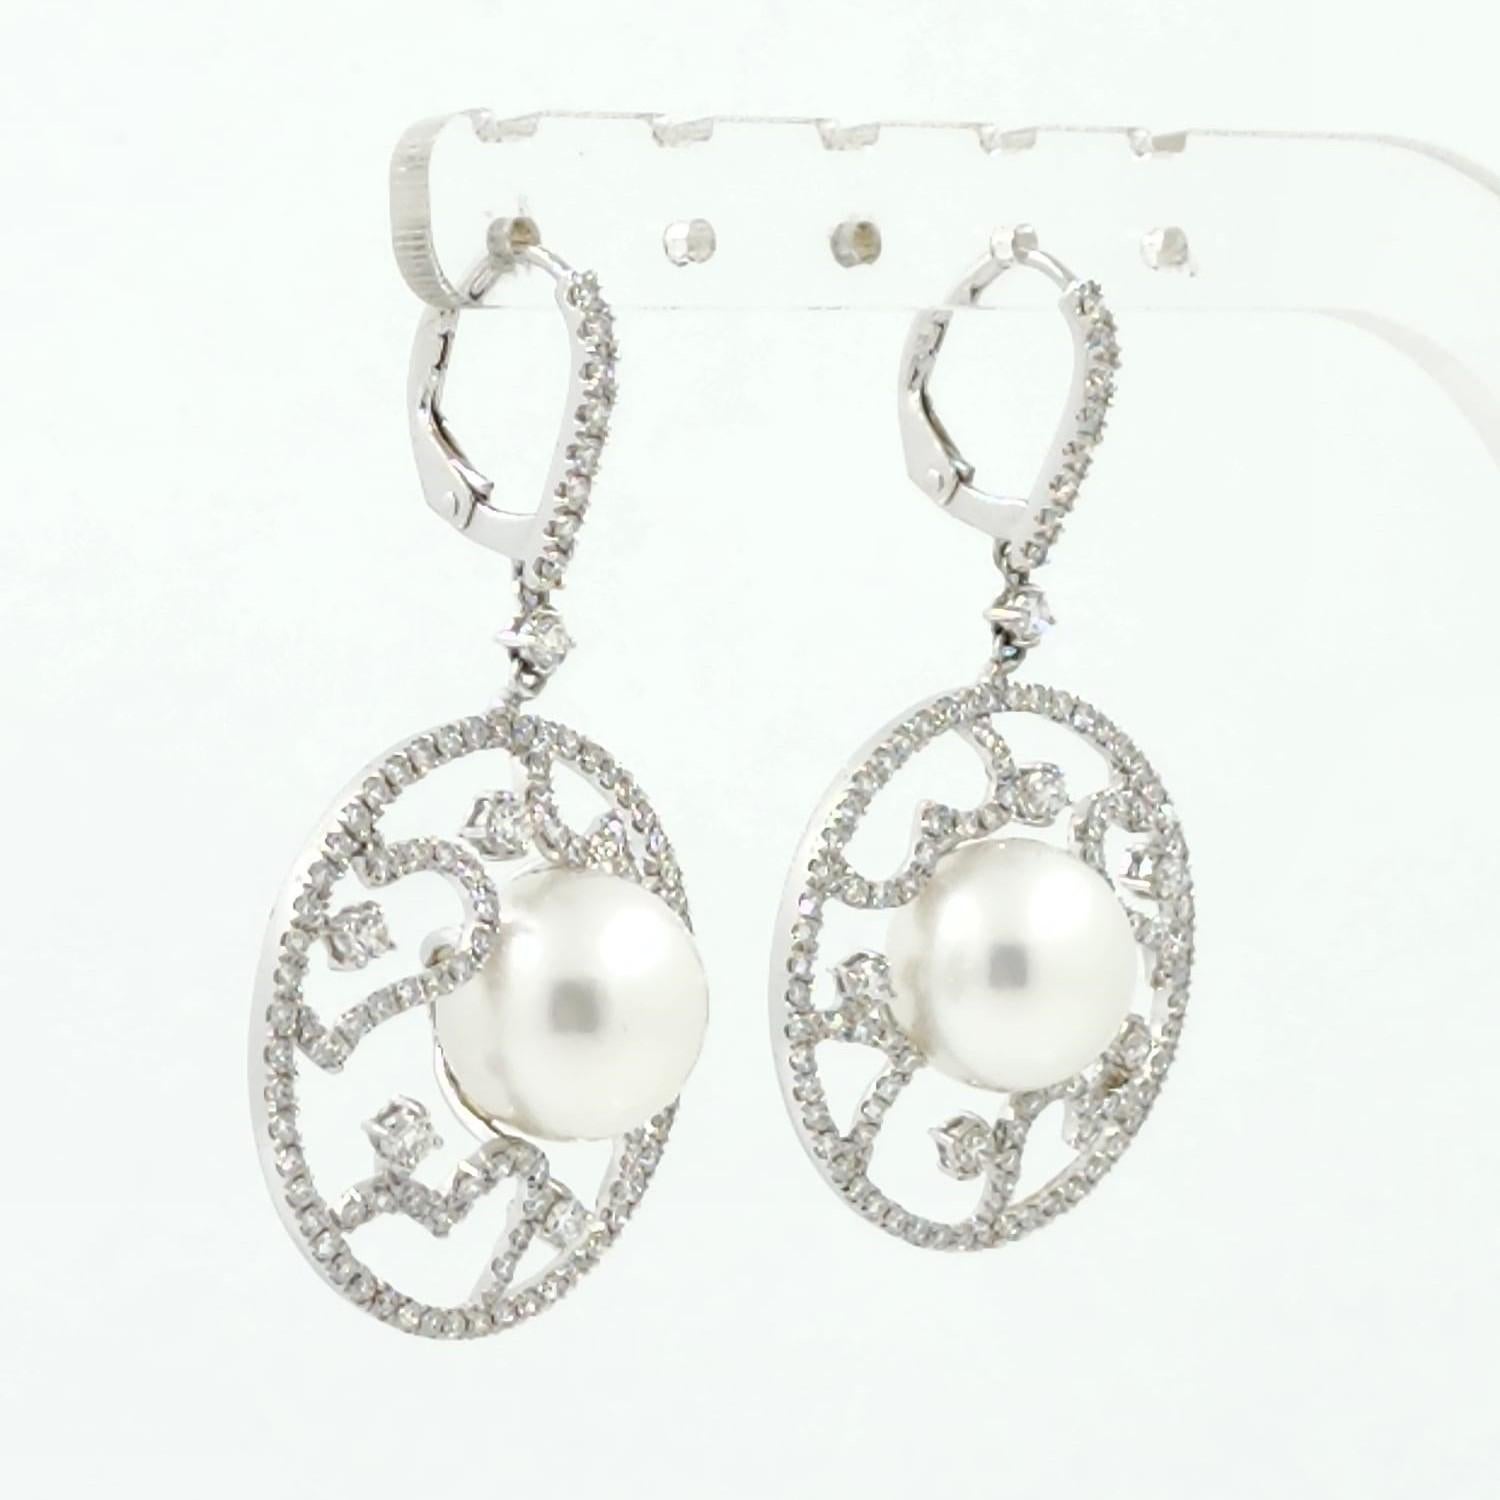 This earrings feature 1.84 carats of white round diamonds, on top of the south sea pearl are set with diamond filigree design. Diamonds are set in 18 karat white gold.  The entire earrings are handmade.
South Sea Pearl 11mm
Diamond 1.78